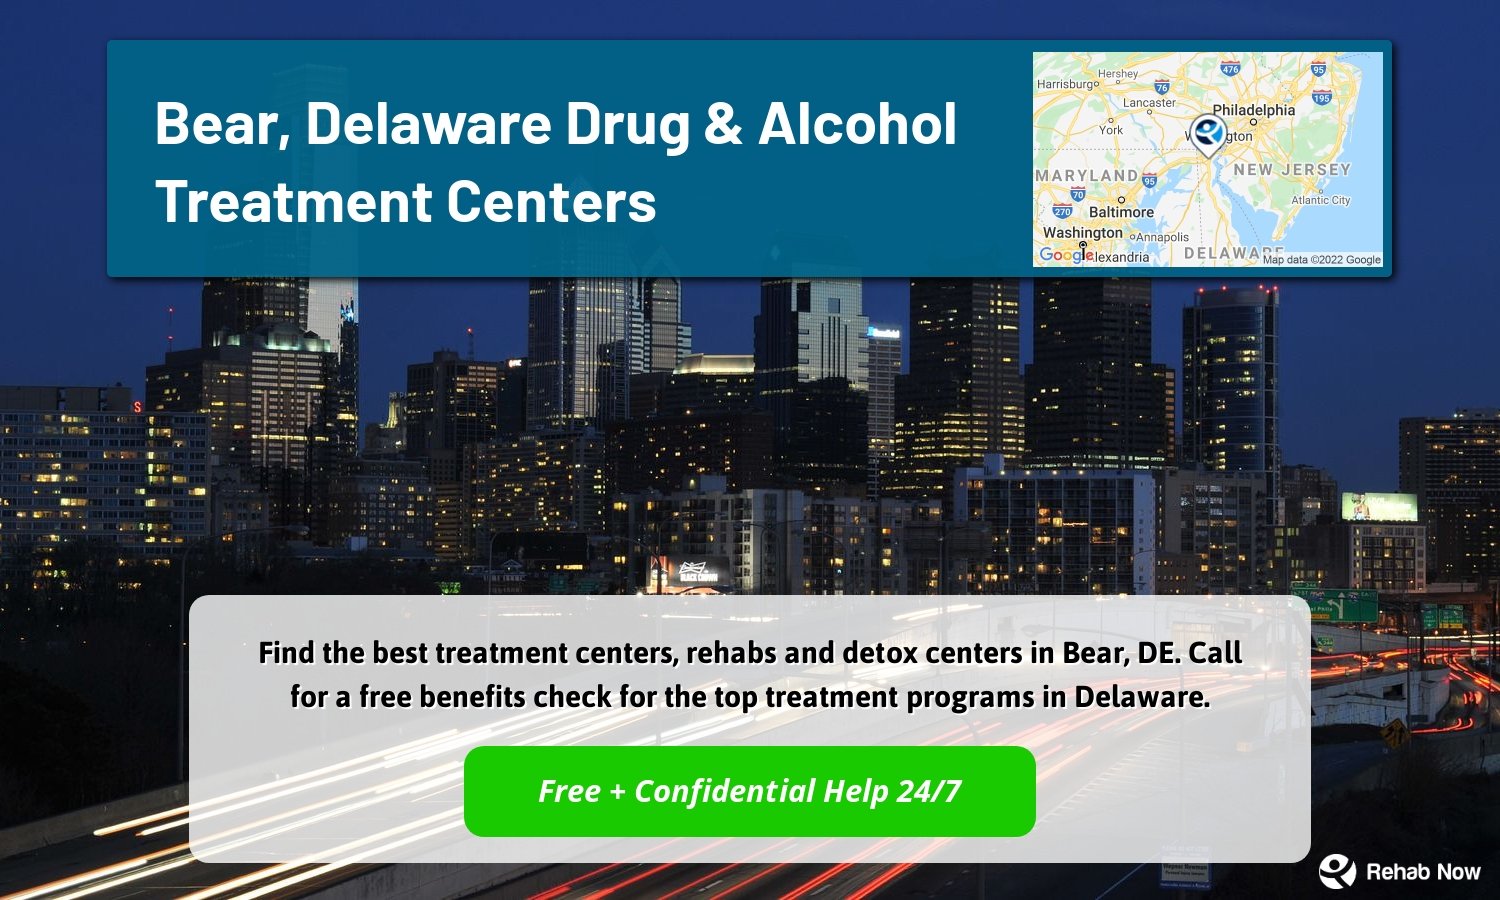 Find the best treatment centers, rehabs and detox centers in Bear, DE. Call for a free benefits check for the top treatment programs in Delaware.